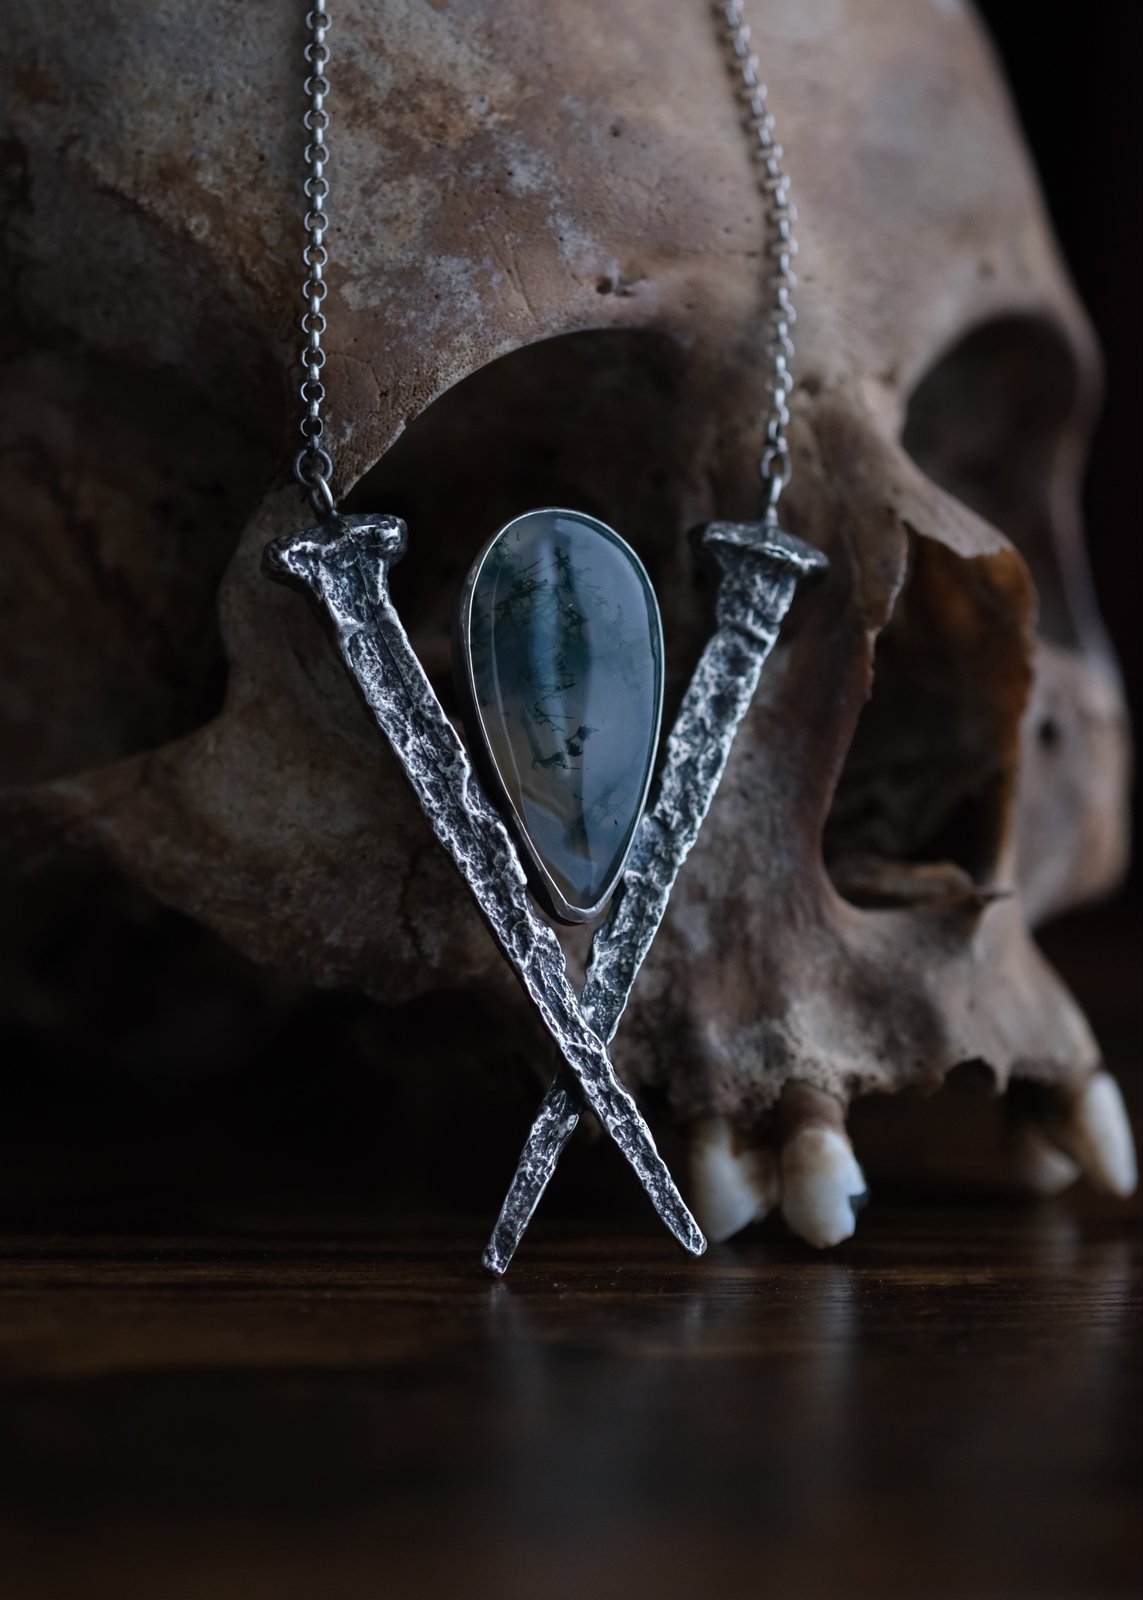 Buy Iron Nail Necklace Hand Forged, Coffin Nail Necklace, Occult Jewellery,  Magick, Goth, Witch, Pagan Jewelry, Good Luck, Voodoo Pendant Online in  India - Etsy